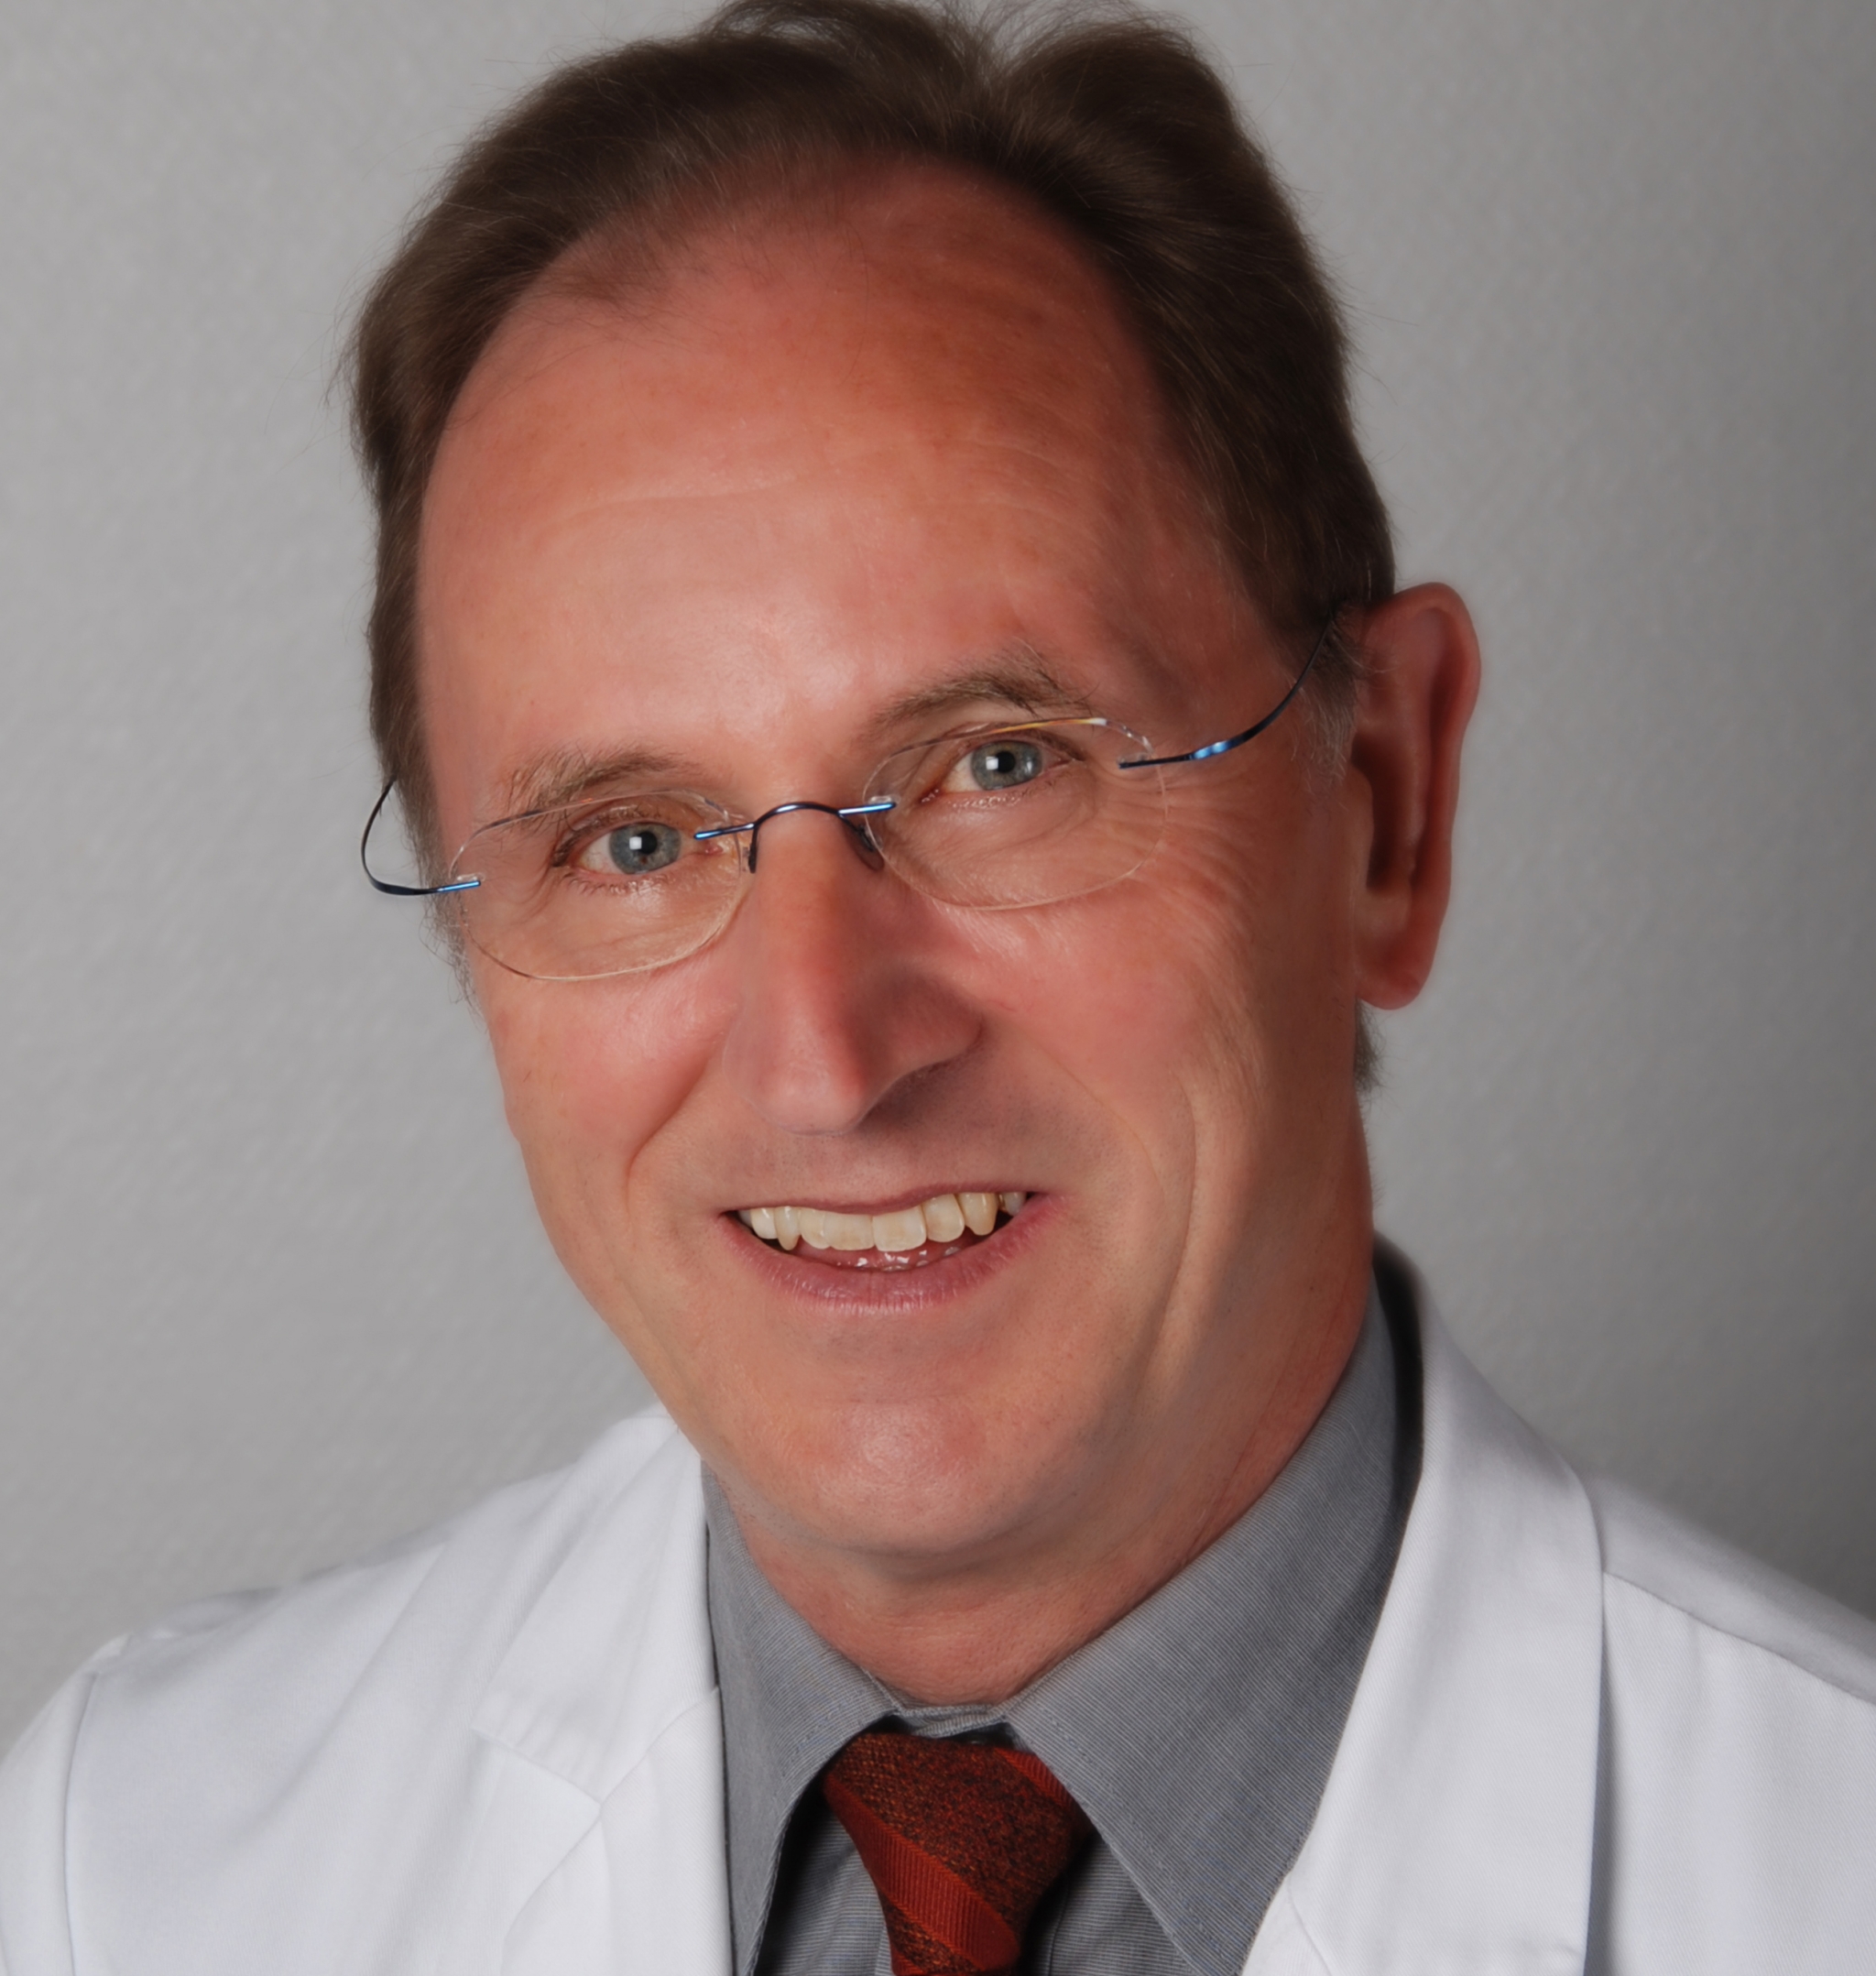 Peter Kern is the spokesperson of the new centre (Photo: University Hospital Ulm)